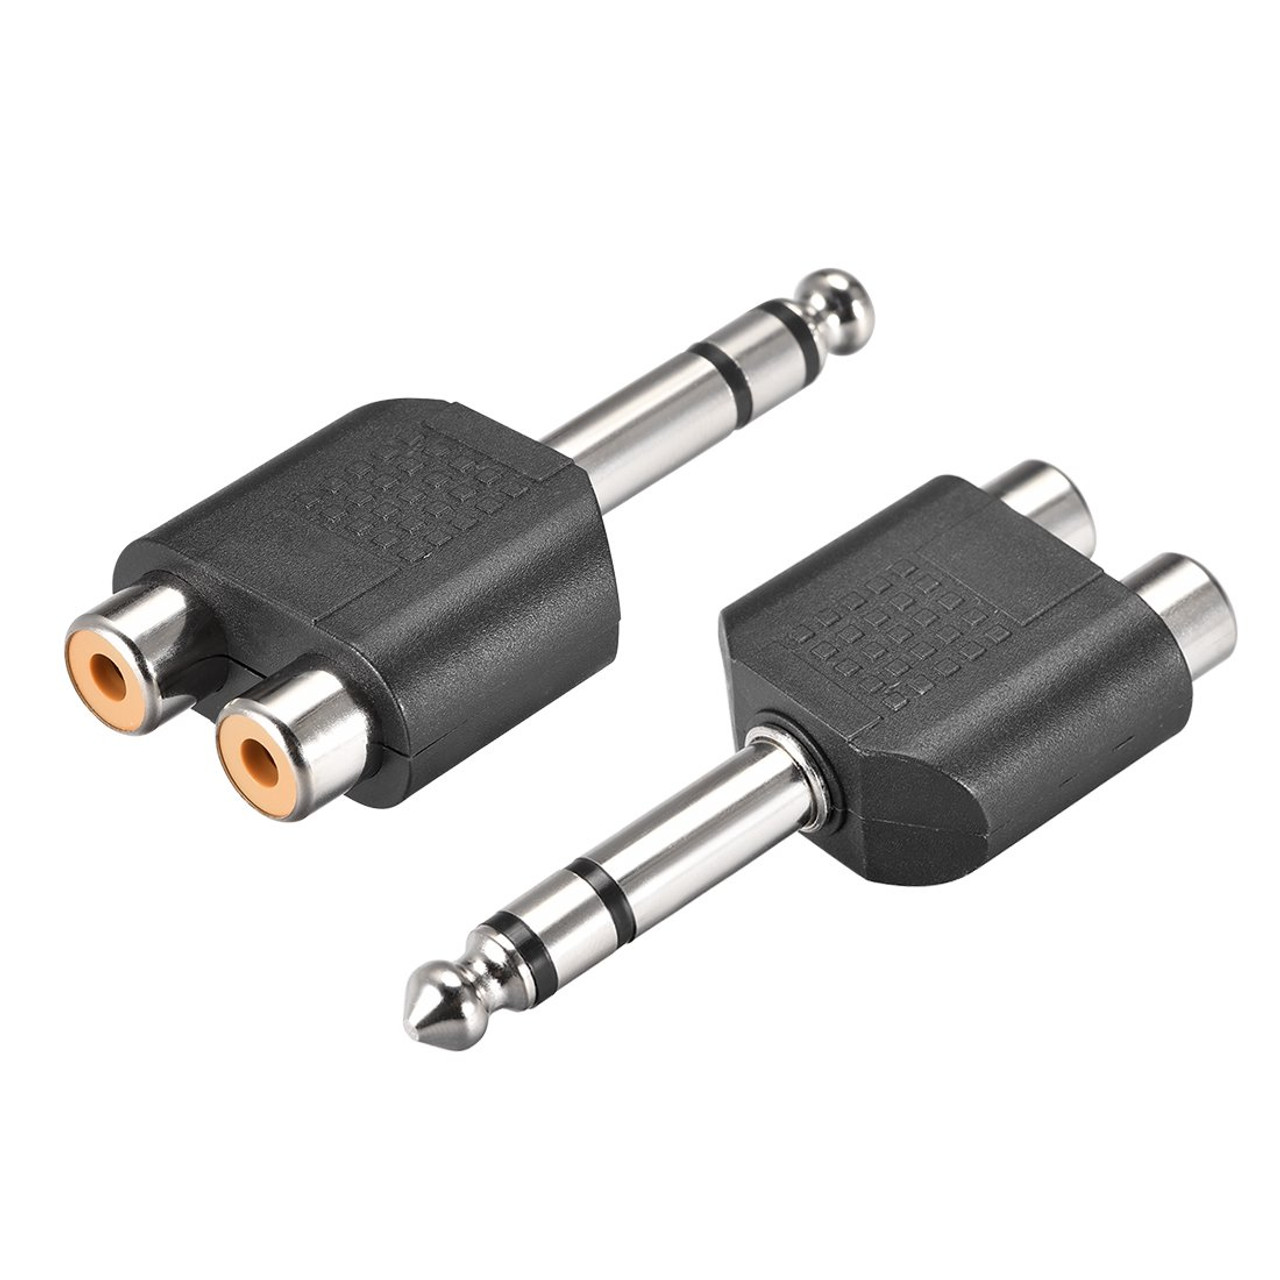 2X 6.35mm 1/4" AUX Male Plug to 2 RCA Female Socket Adapter Y Splitter Converter Connector